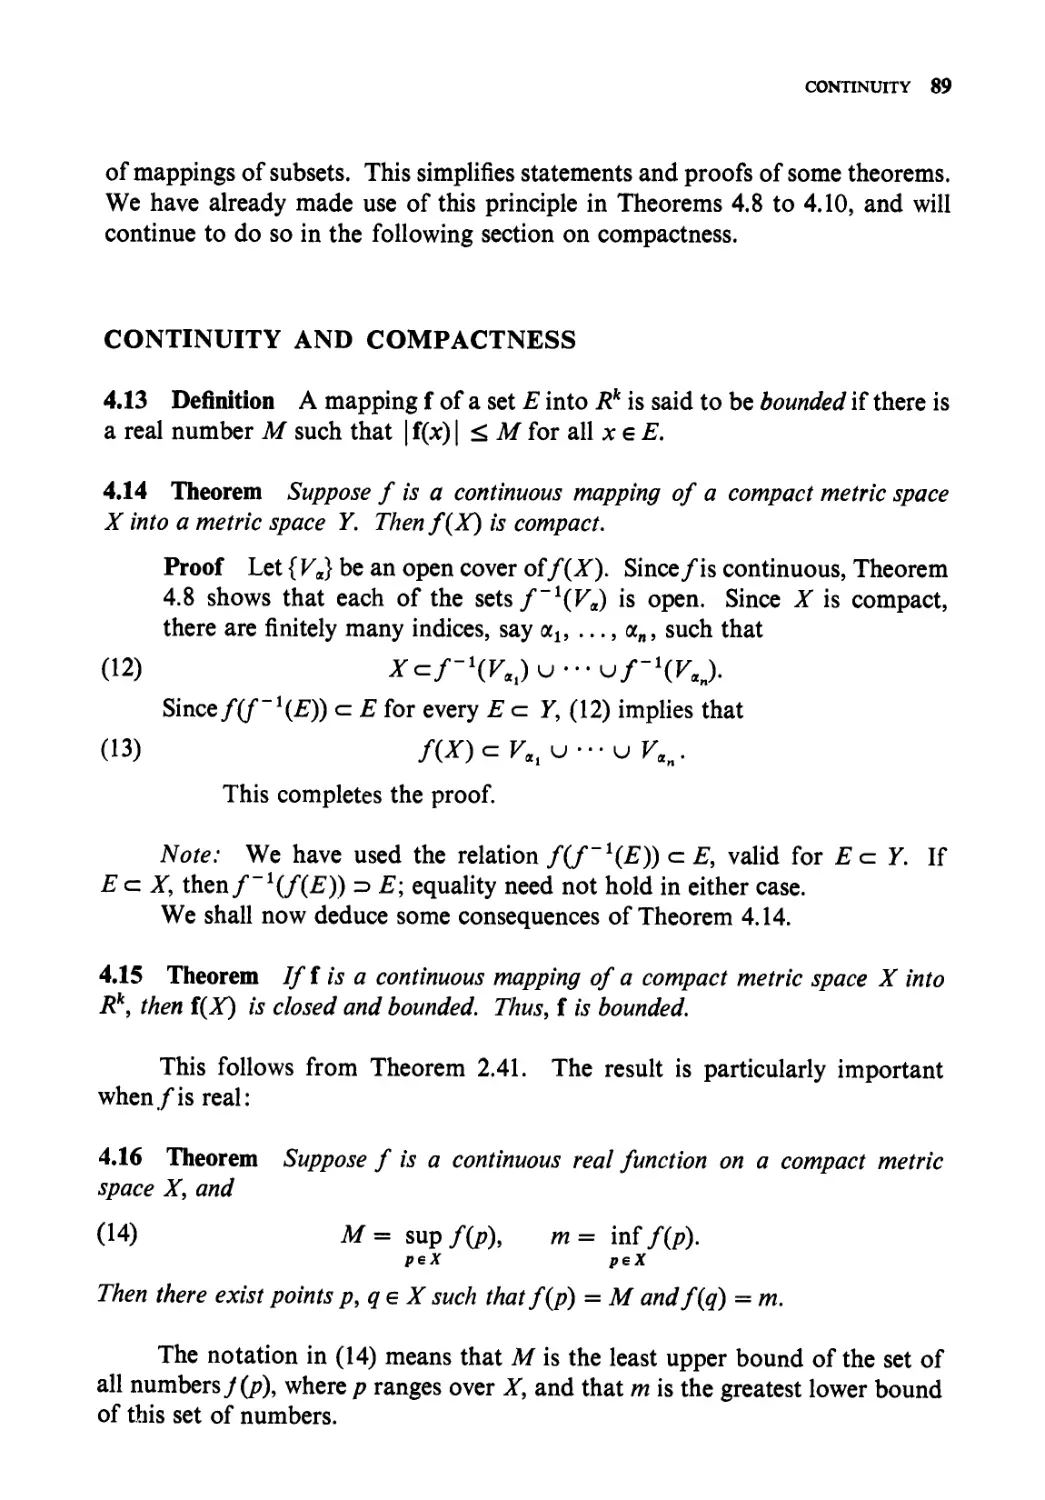 Continuity and compactness